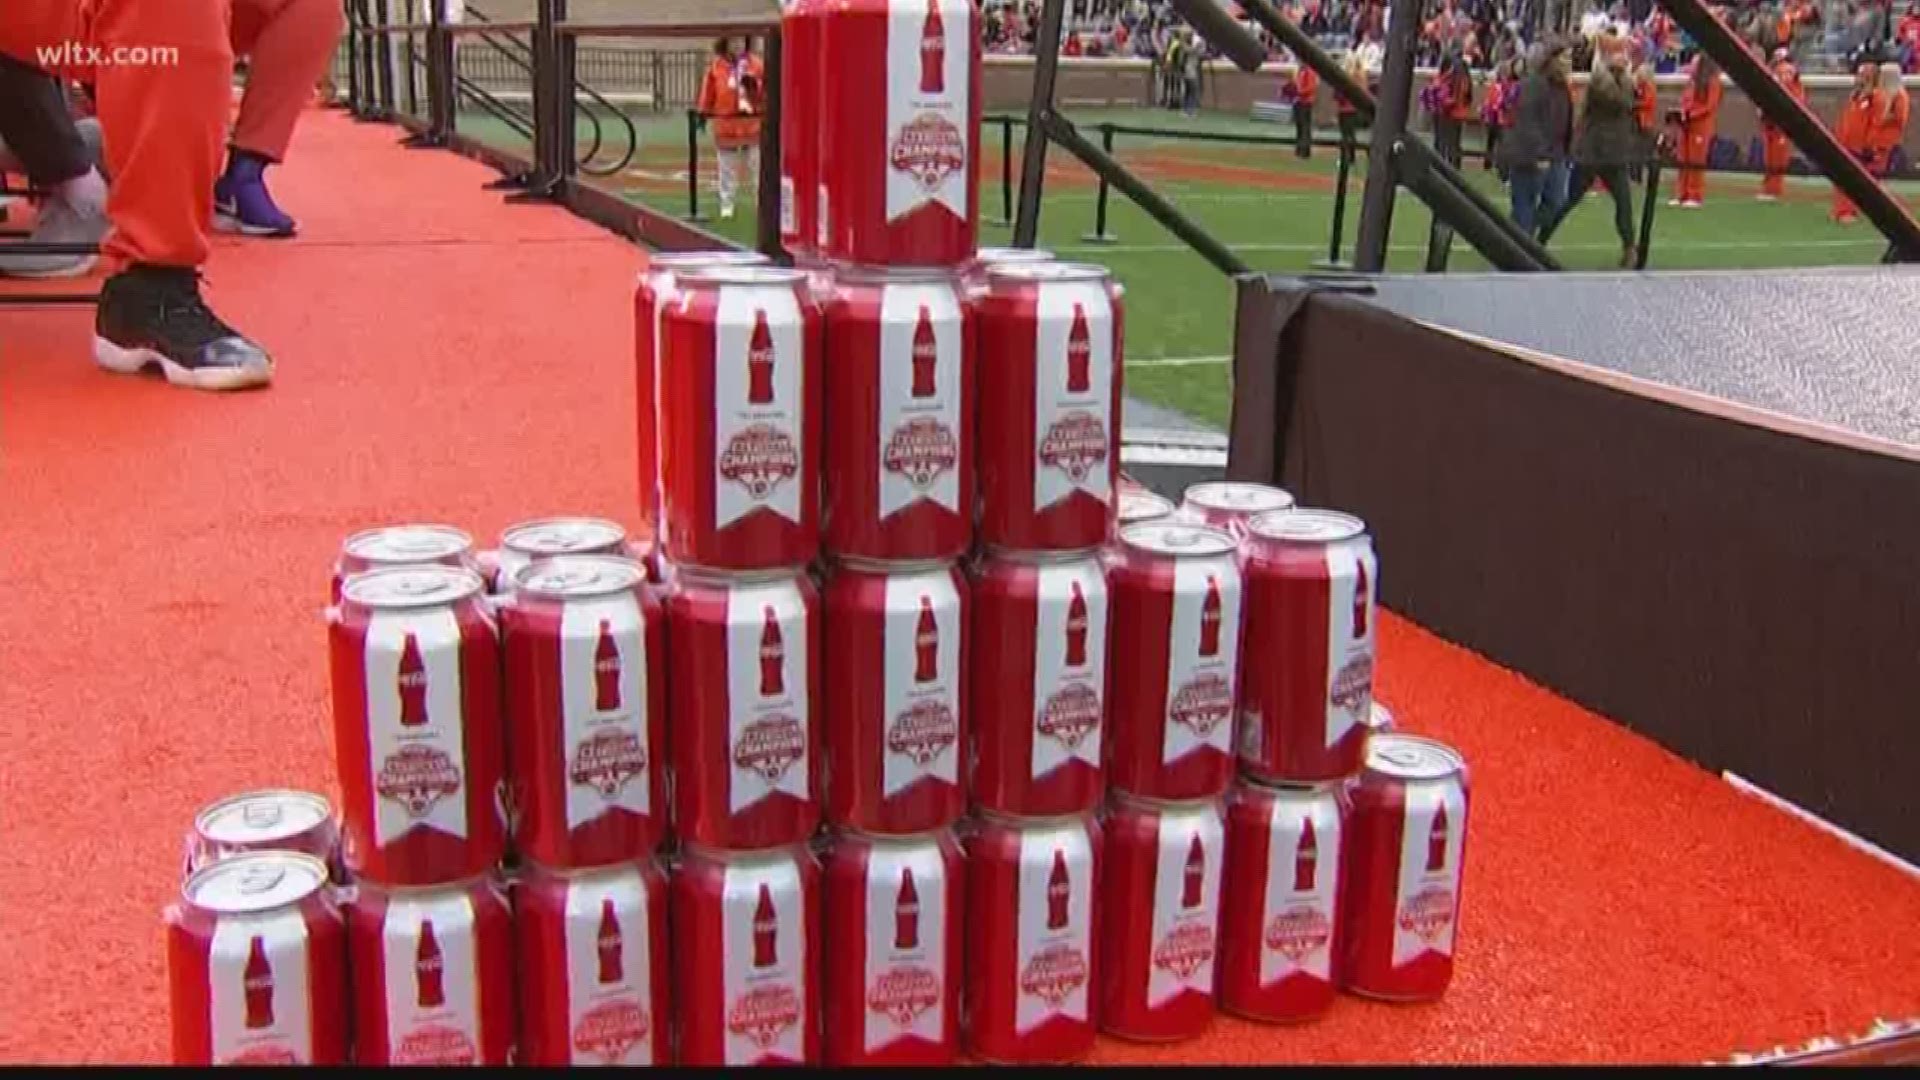 Clemson fans will soon be able to savor their victory in college football with a special can of Coke.